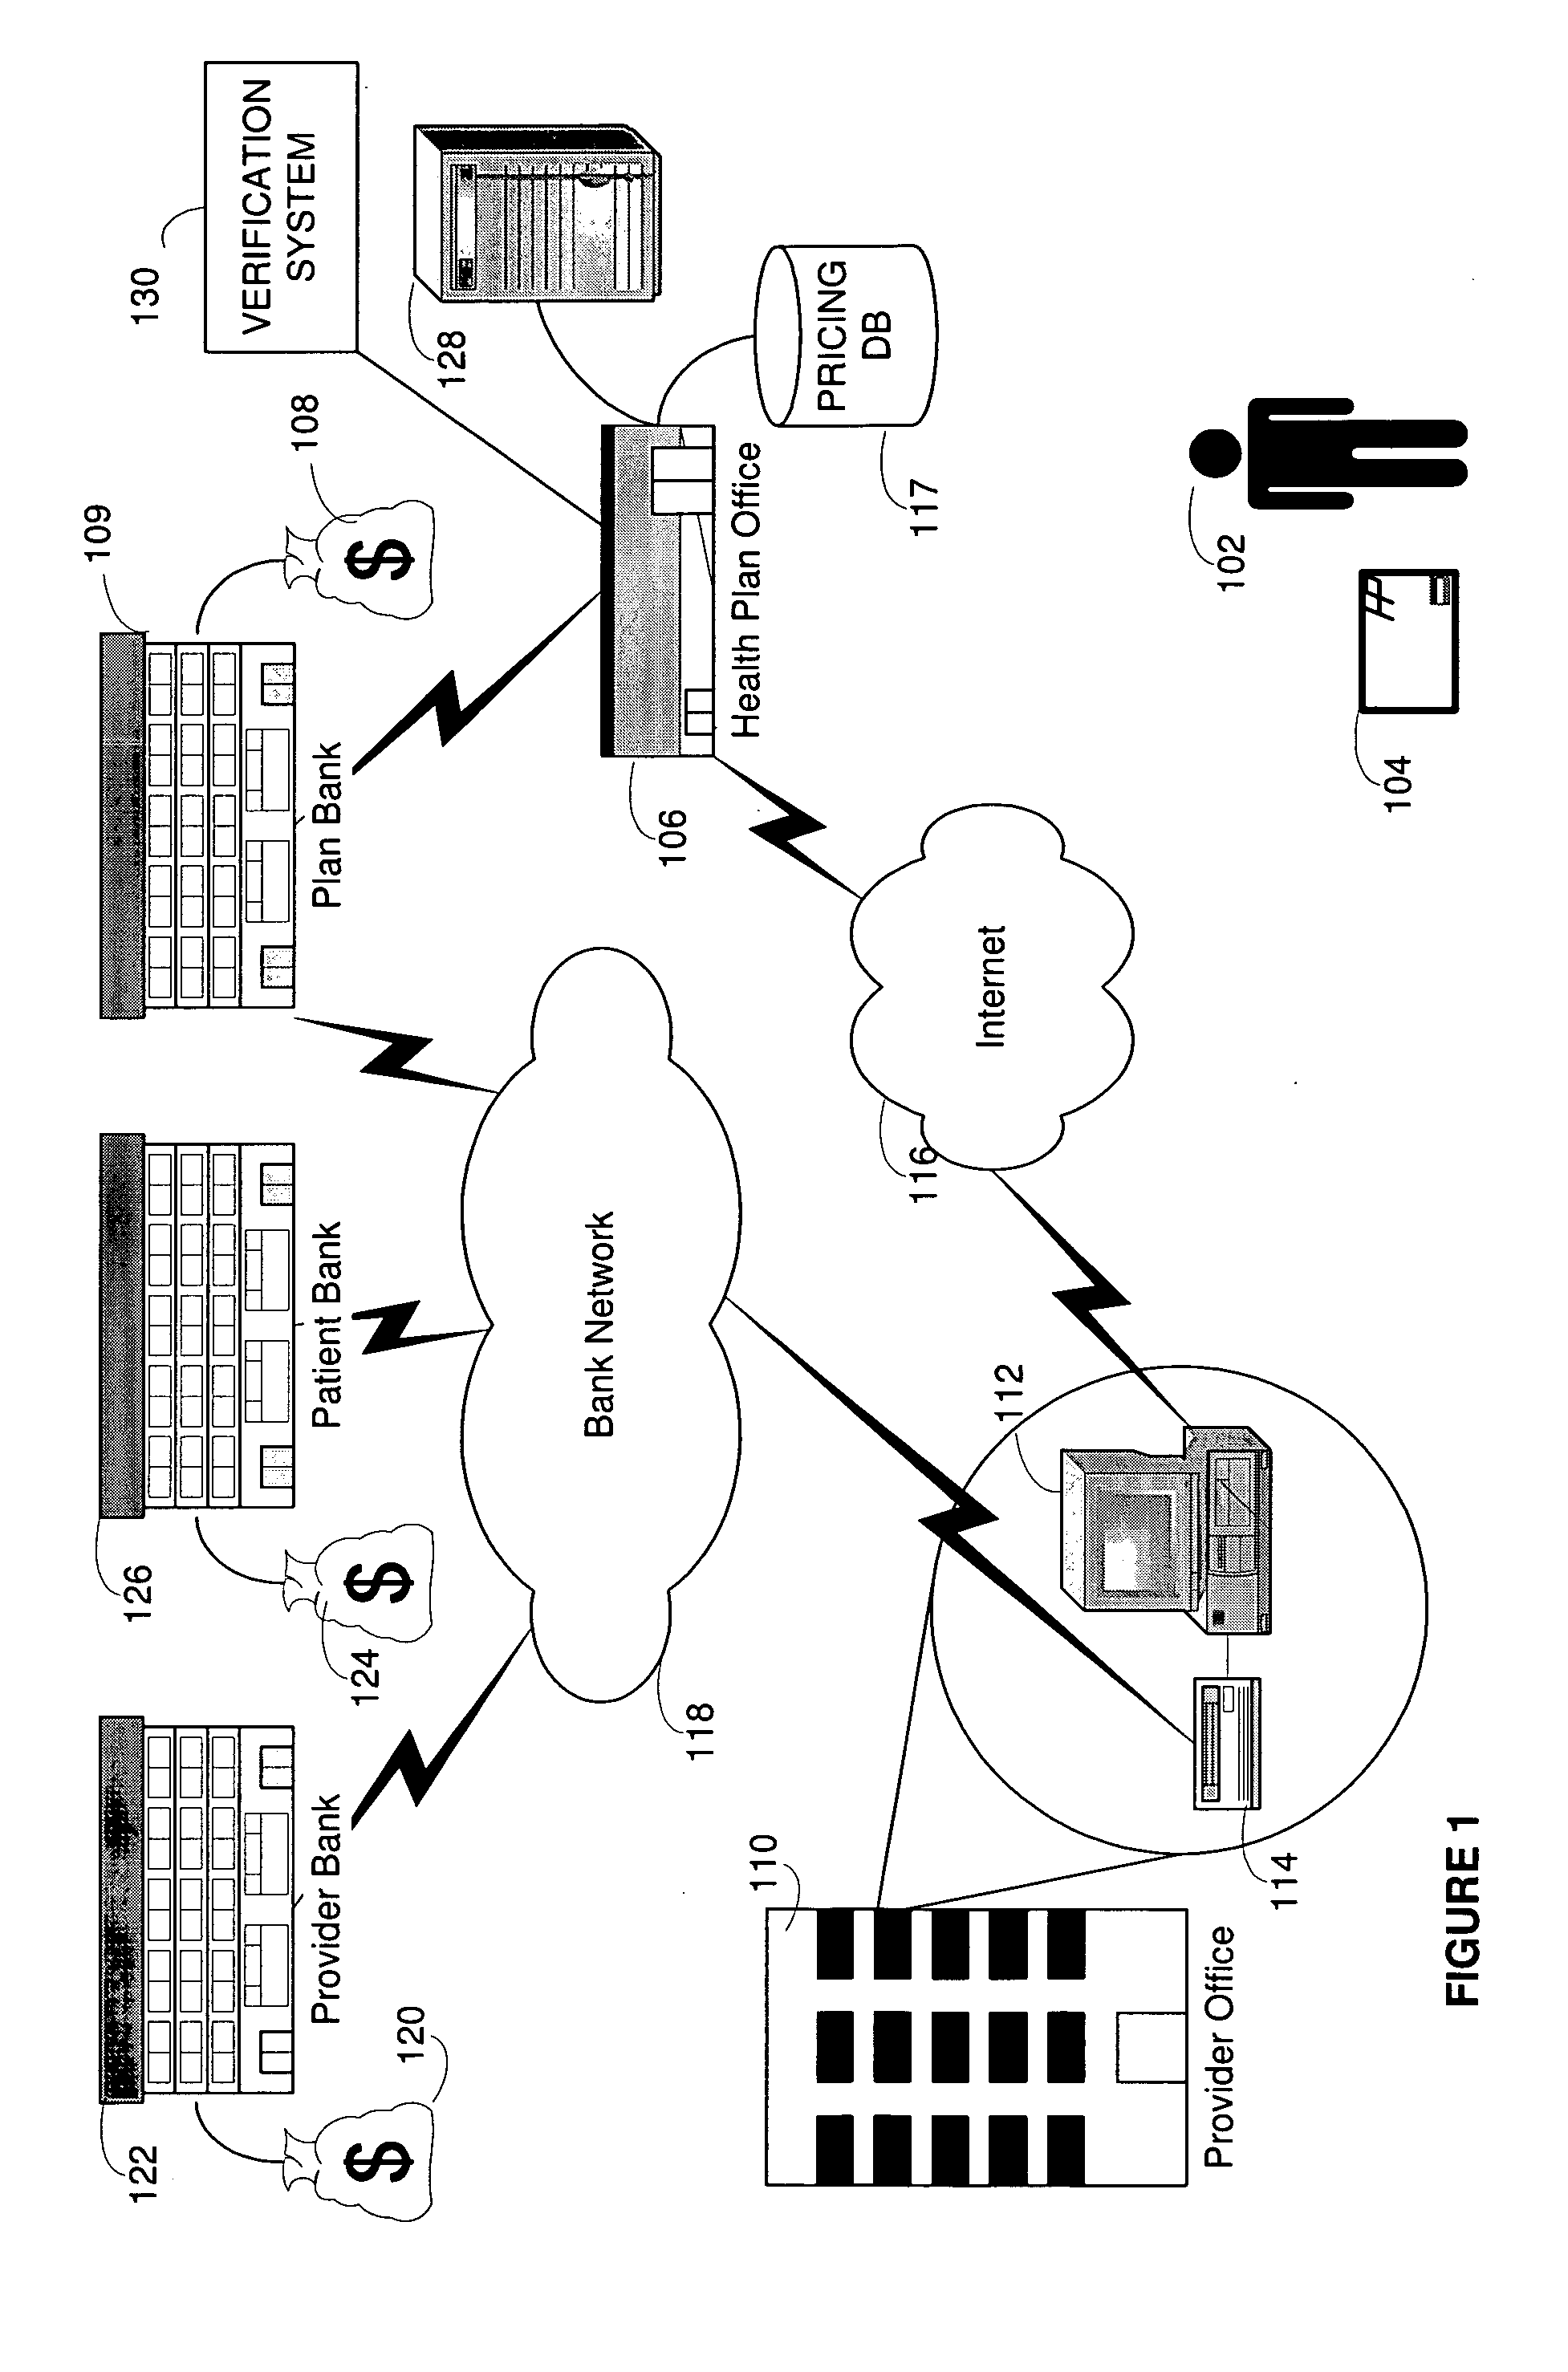 Efficient system and method for obtaining preferred rates for provision of health care services